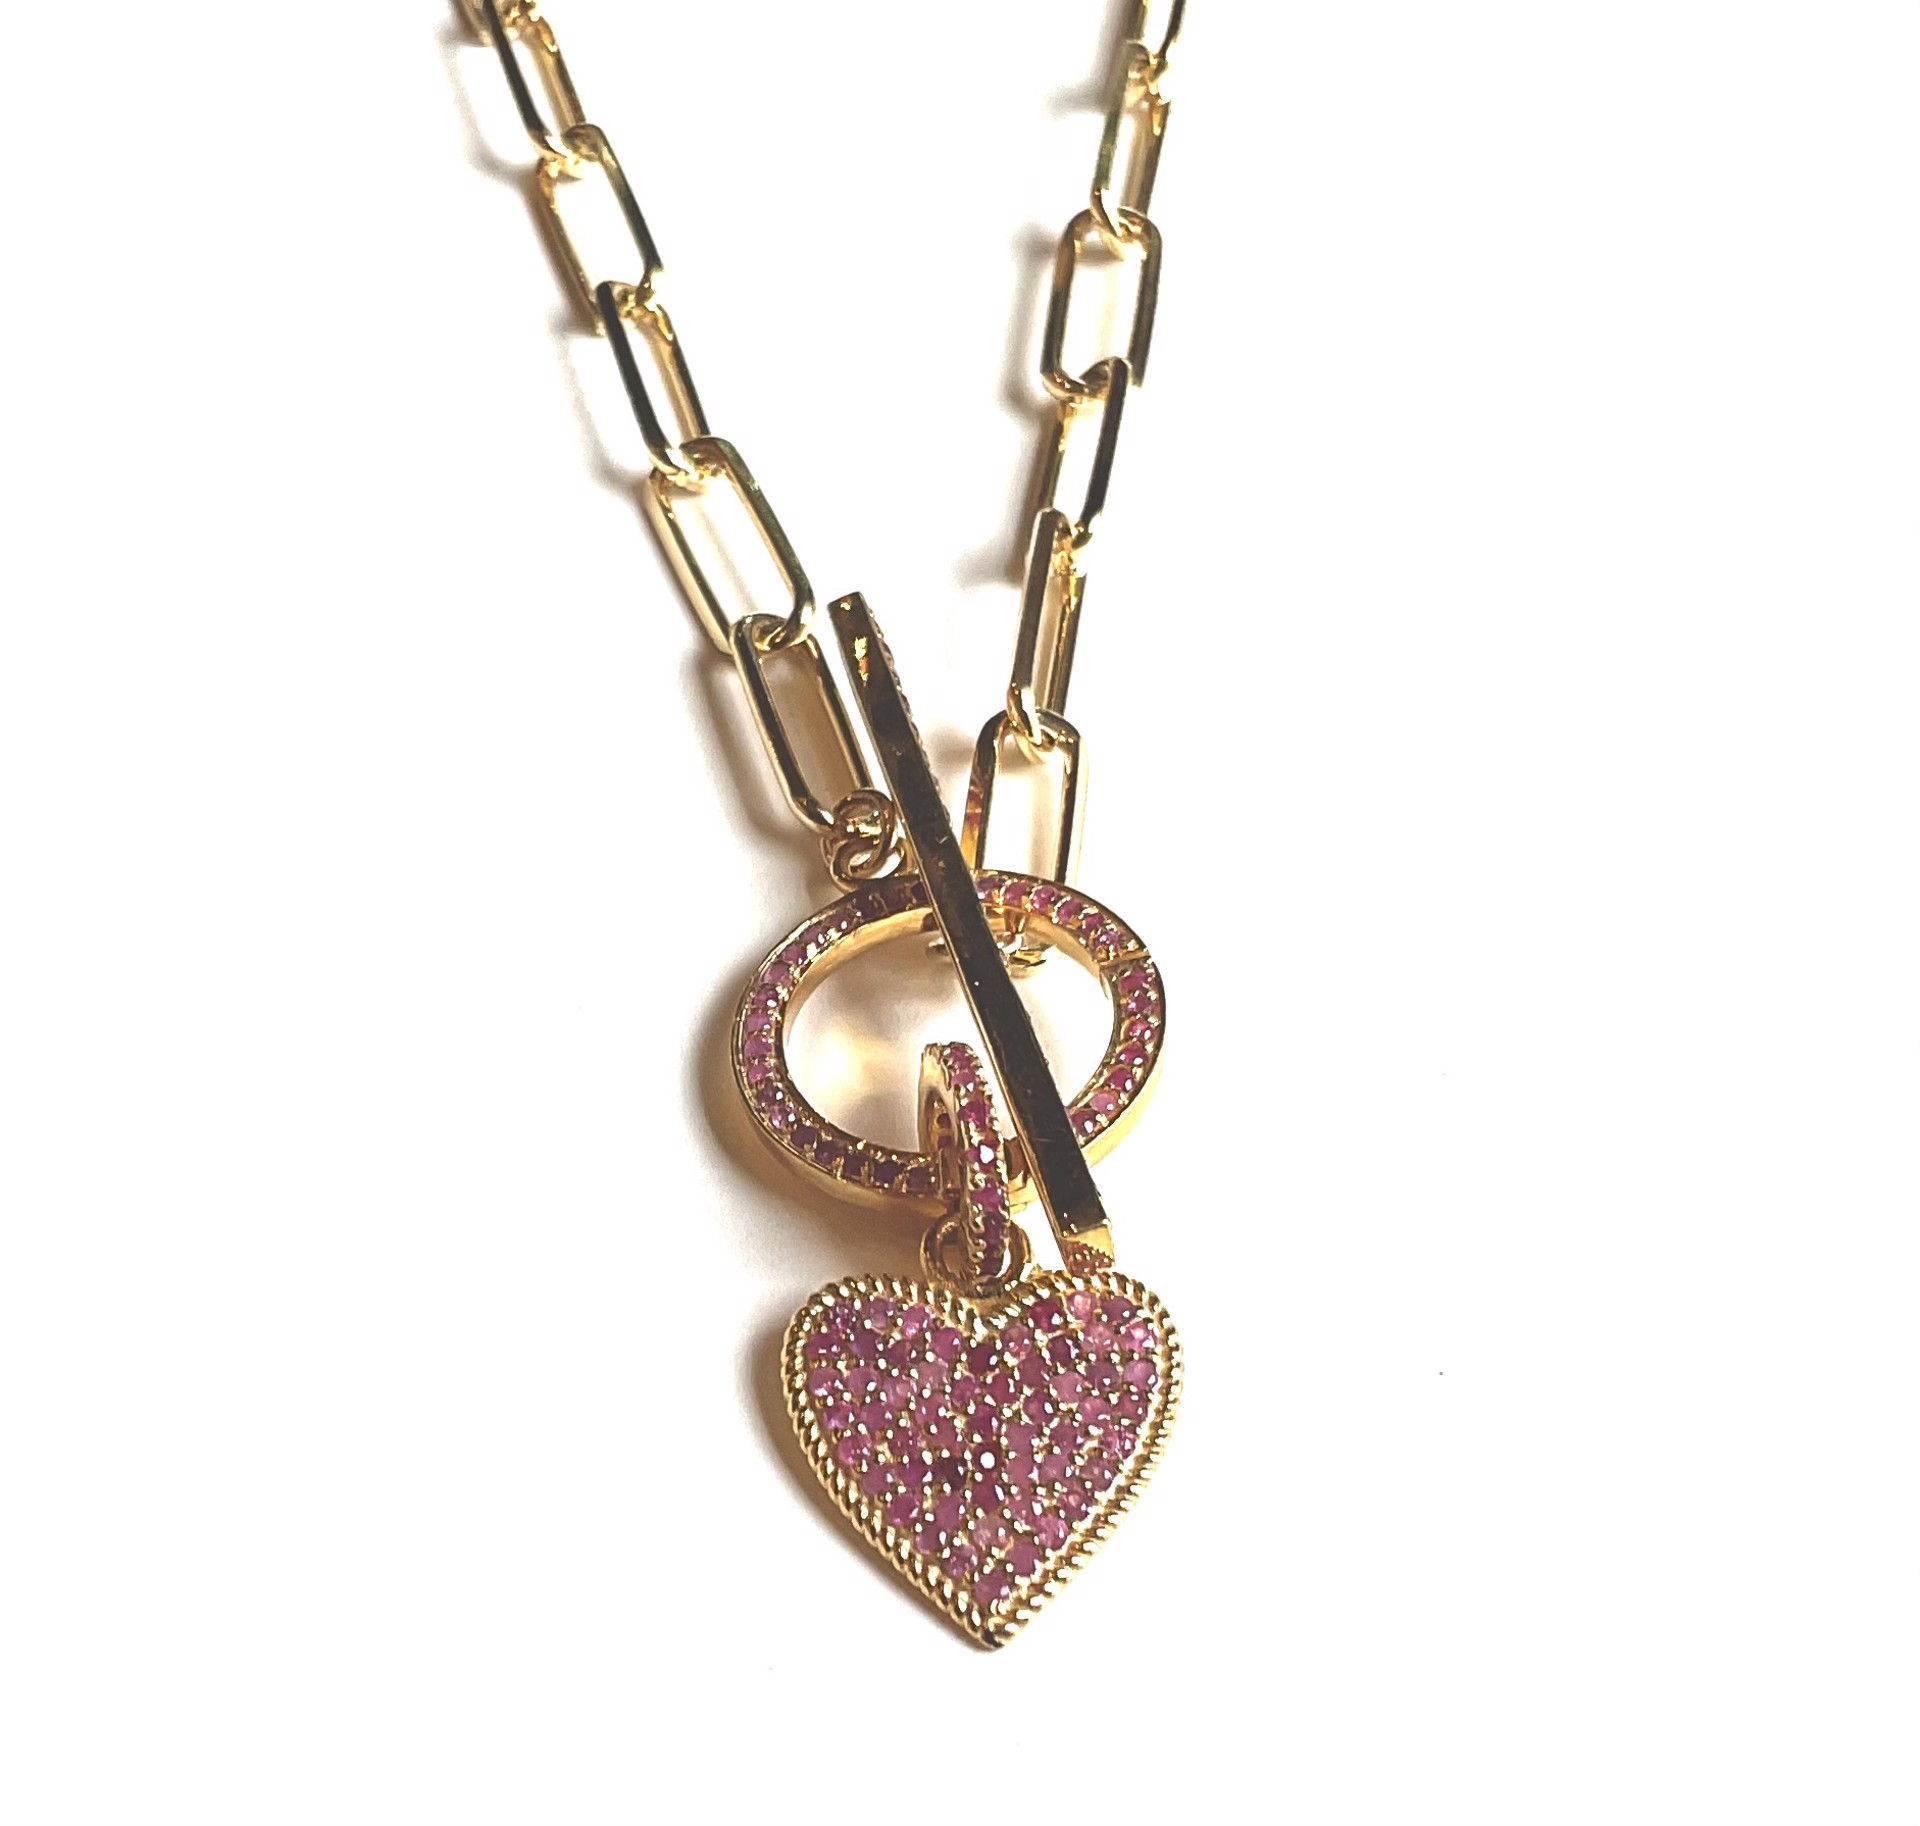 KB-N137 GVML Pprclp Chain with Ruby Toggle Clasp by Karen Birchmier